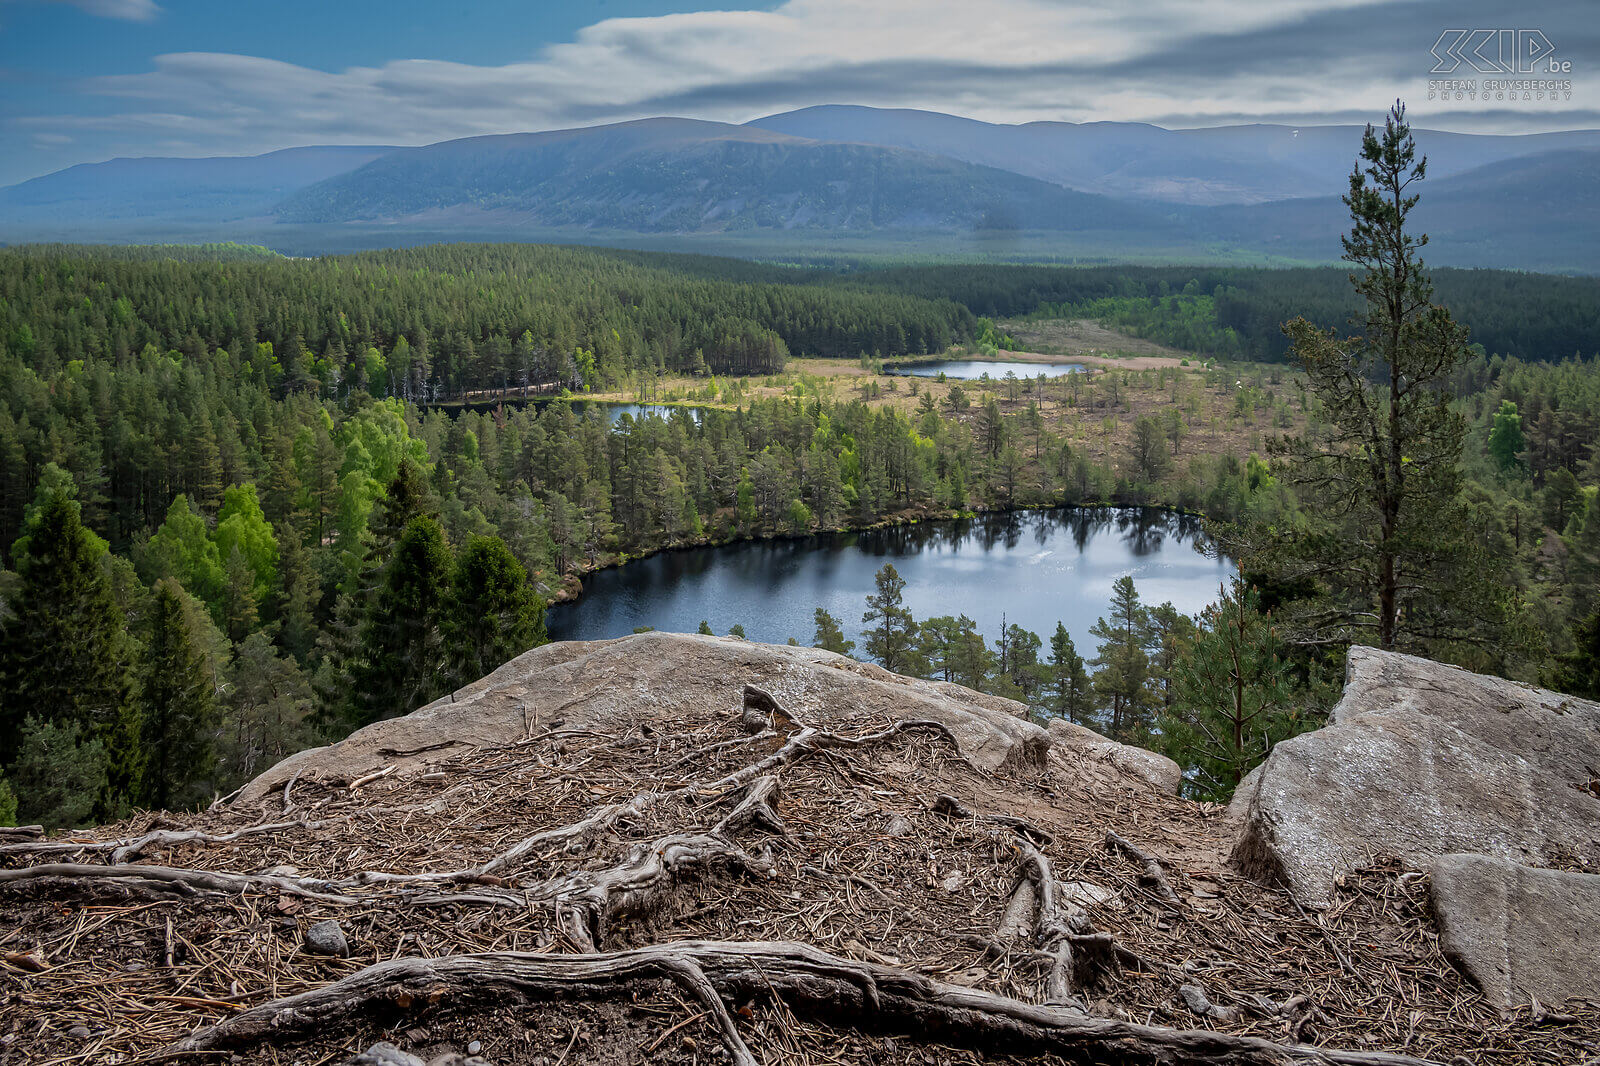 Glenmore Forest Park - Uath Lochans Glenmore Forest Park lies within Cairngorms National Park. It's a great place where you can see old forests and beautiful lochs. Stefan Cruysberghs